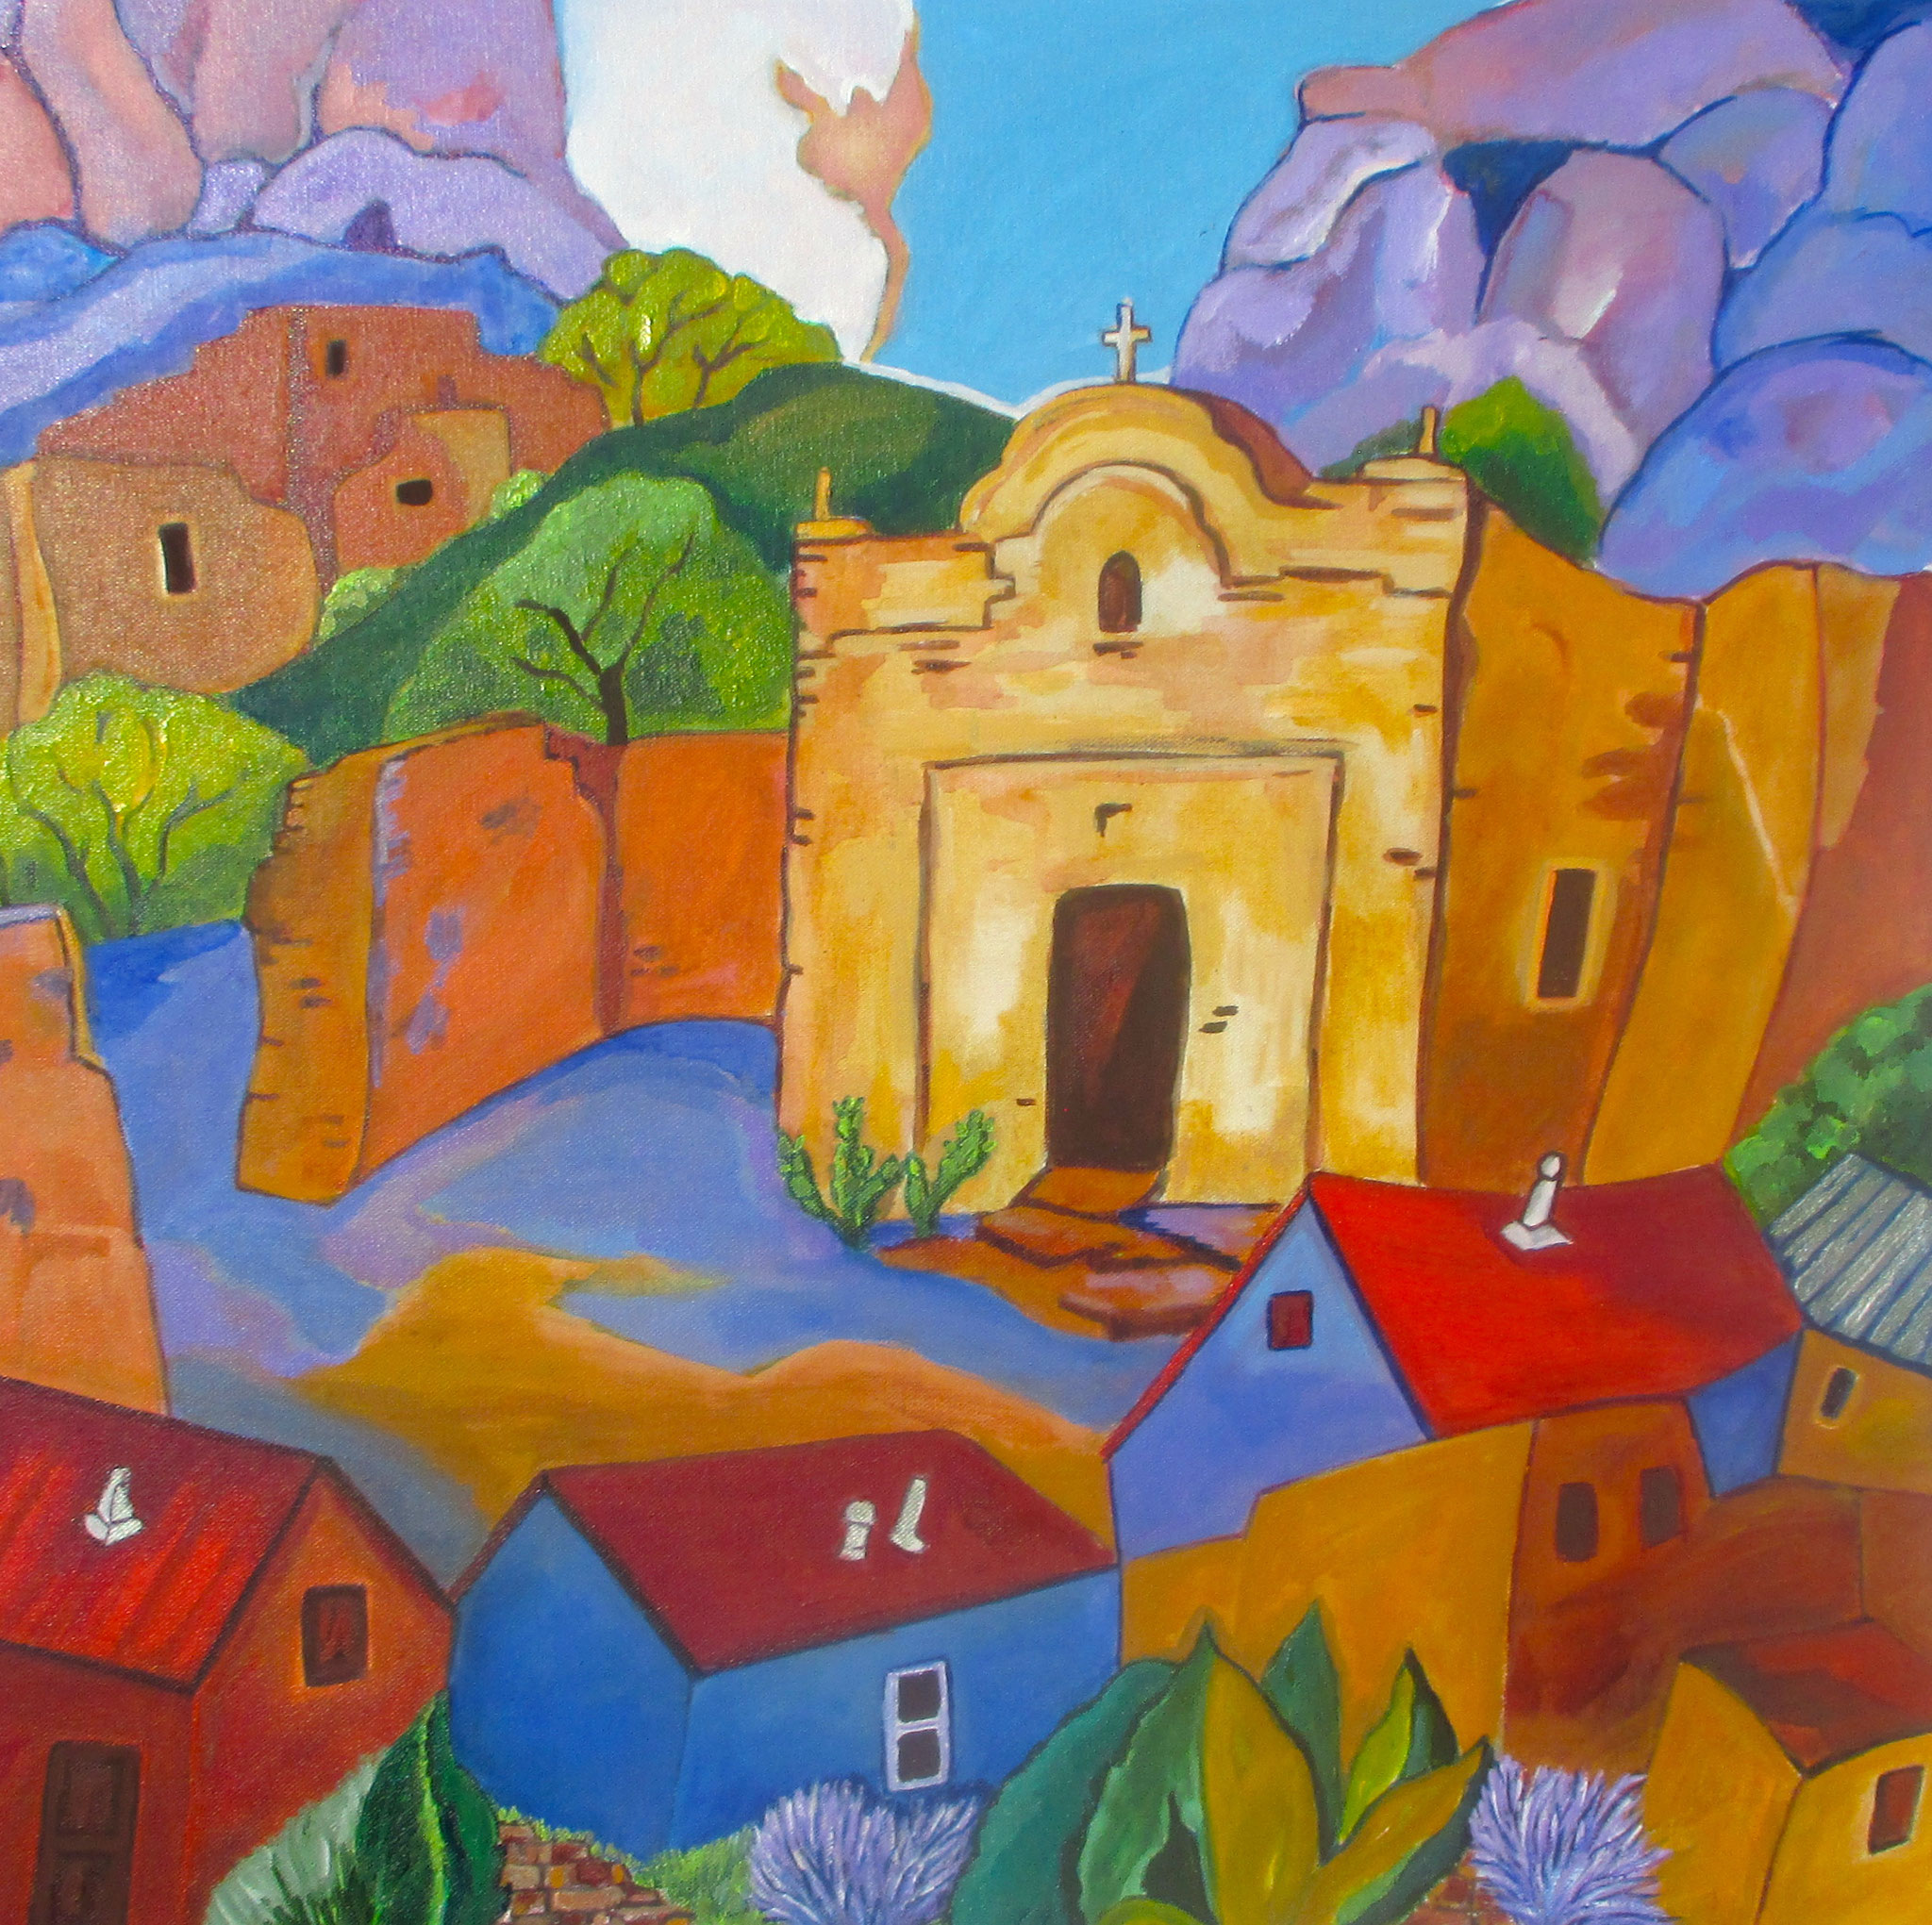 Anglo Village, acrylic on canvas, 24 x 24, SOLD